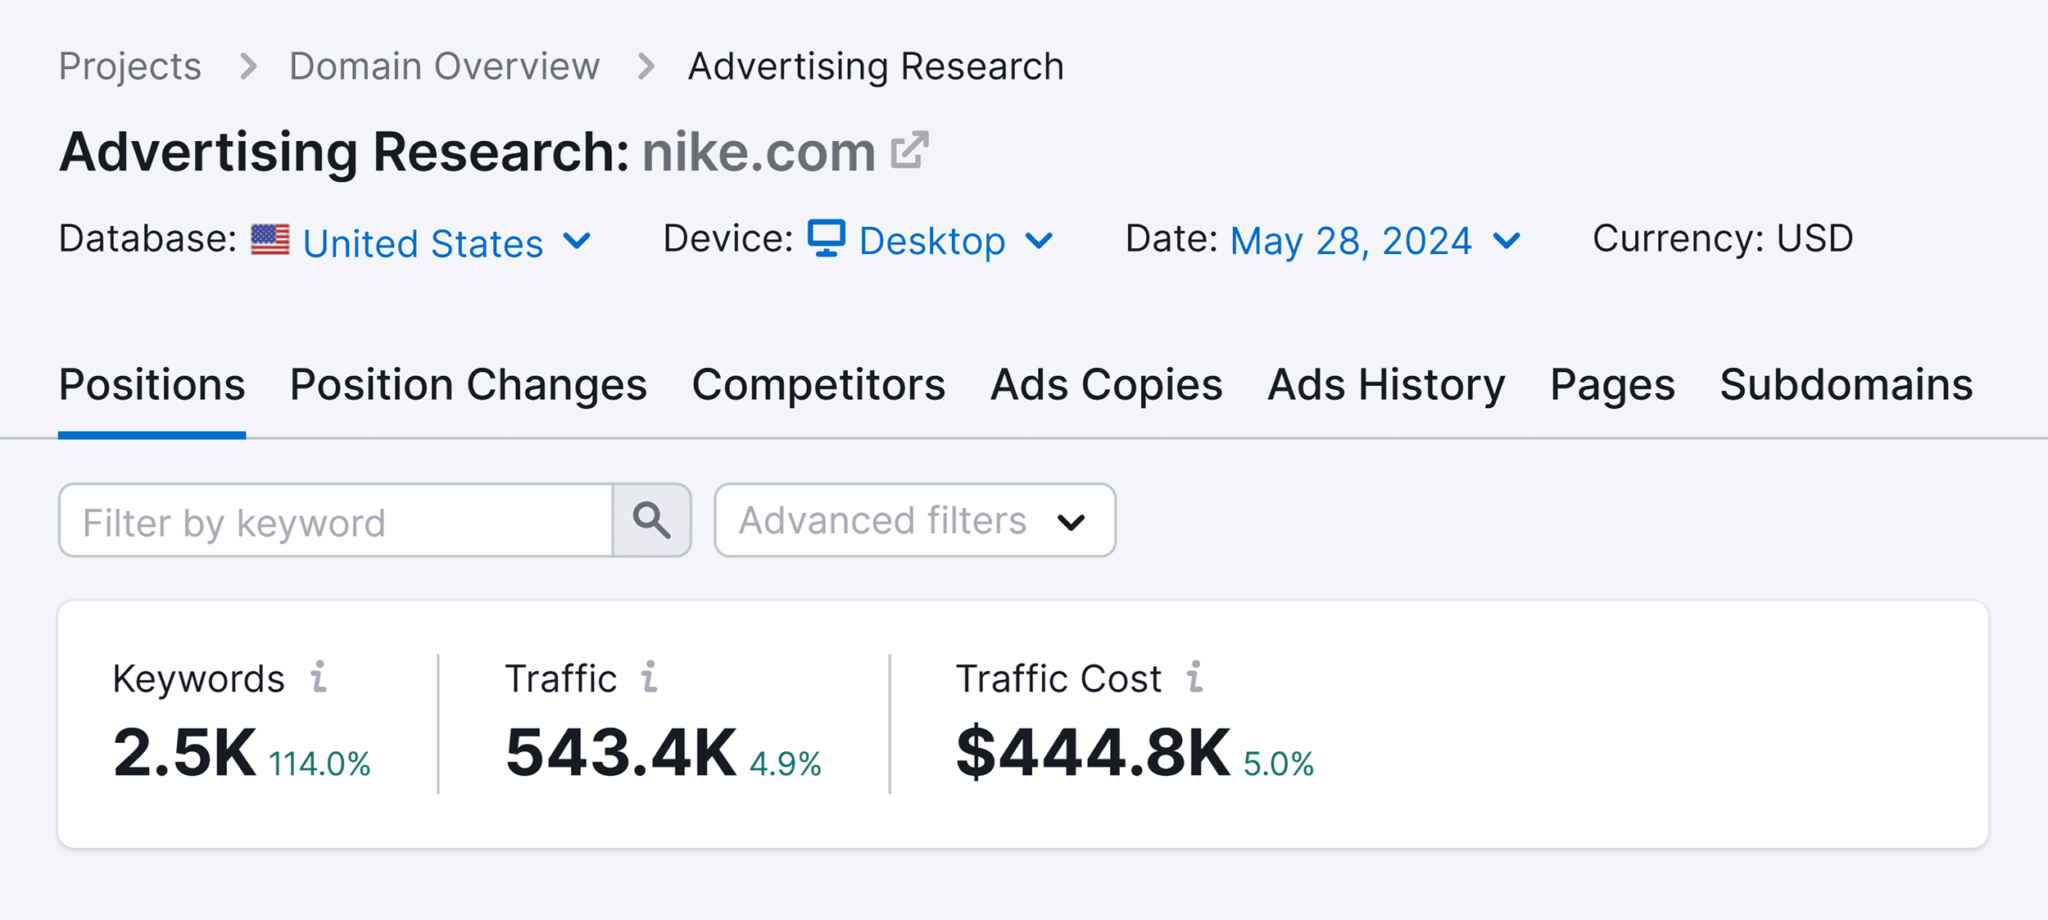 advertising-research-nike 29 Top Digital Marketing Tools for Every Budget